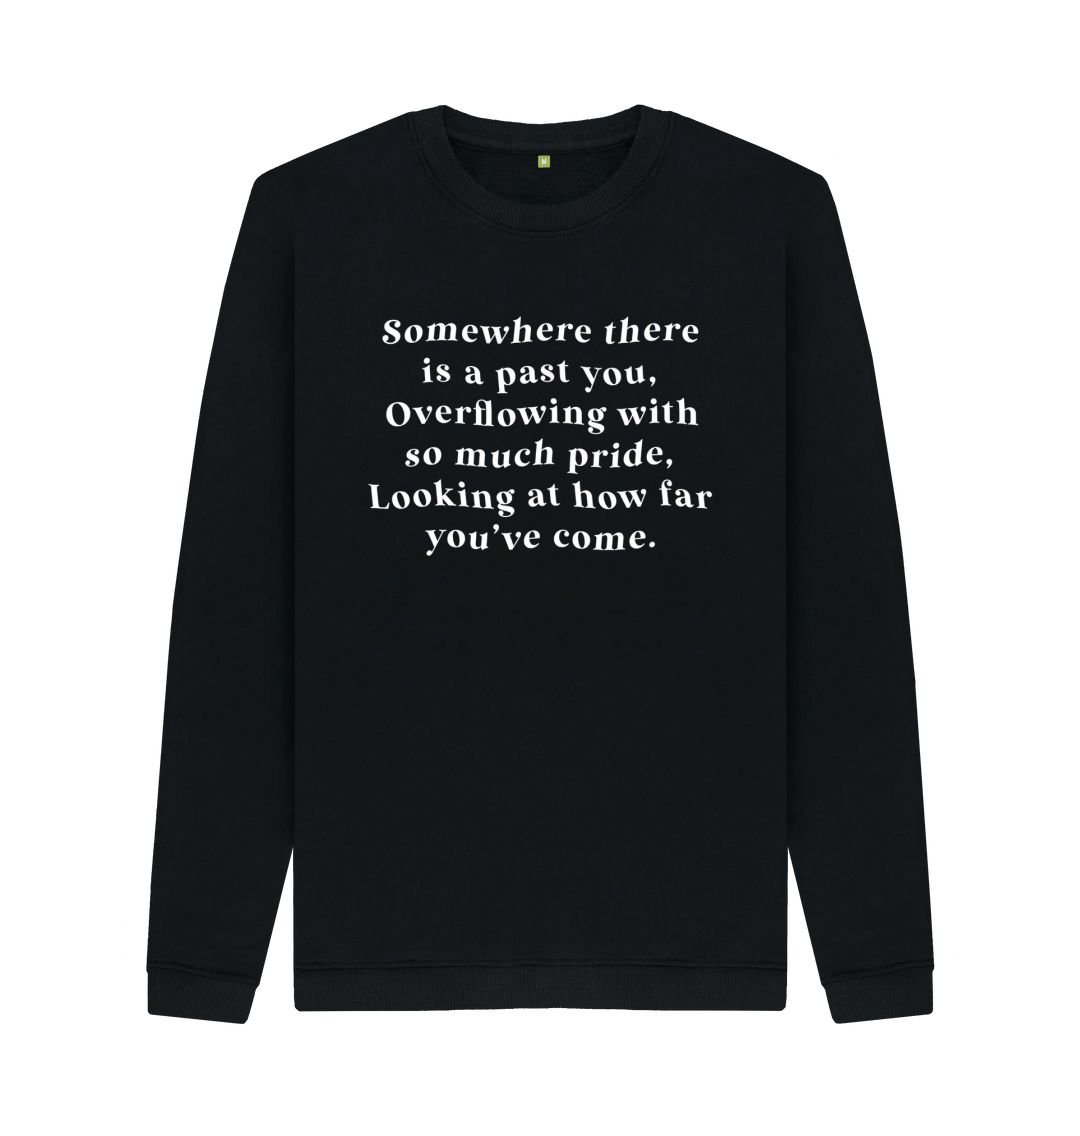 Black Somewhere There is a Past You Sweatshirt - Black